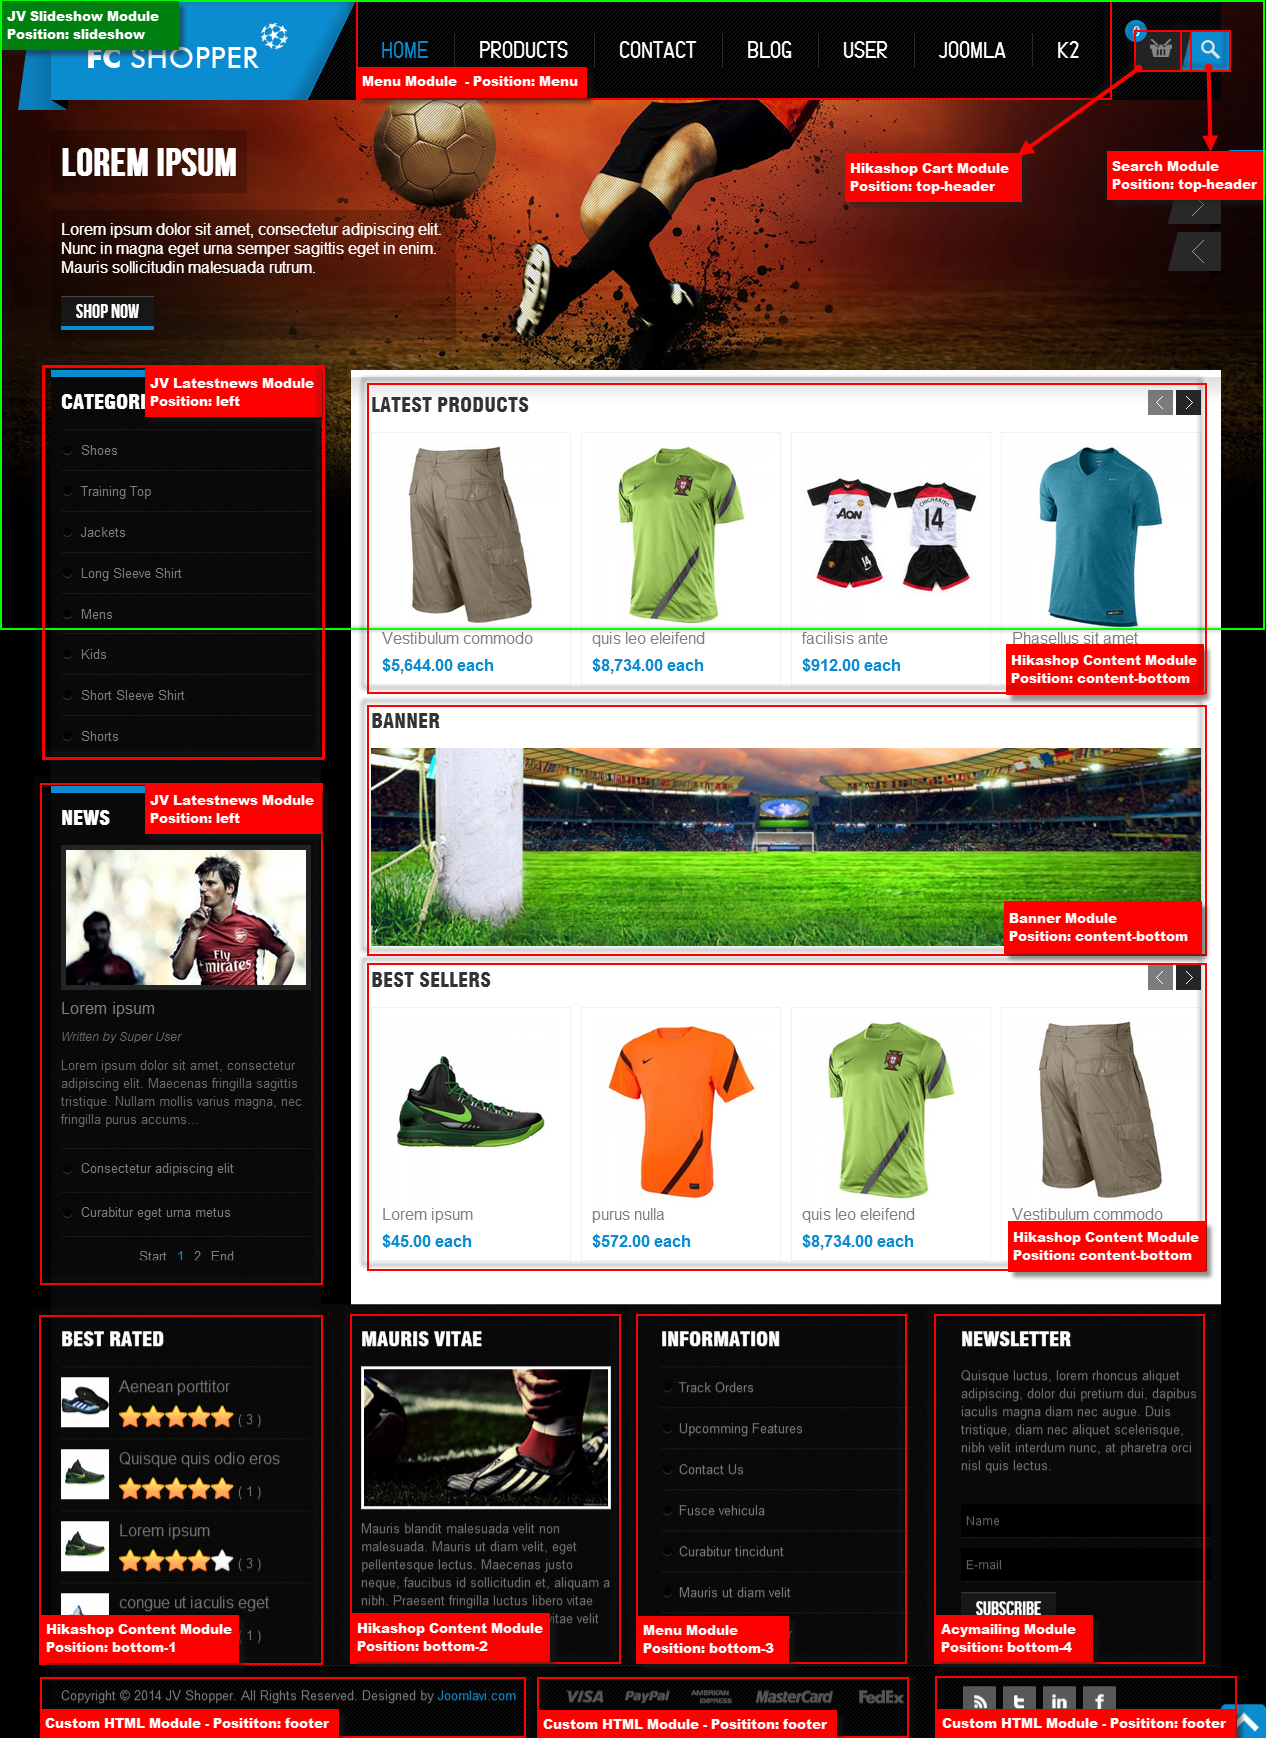 JV Shopper template modules and position